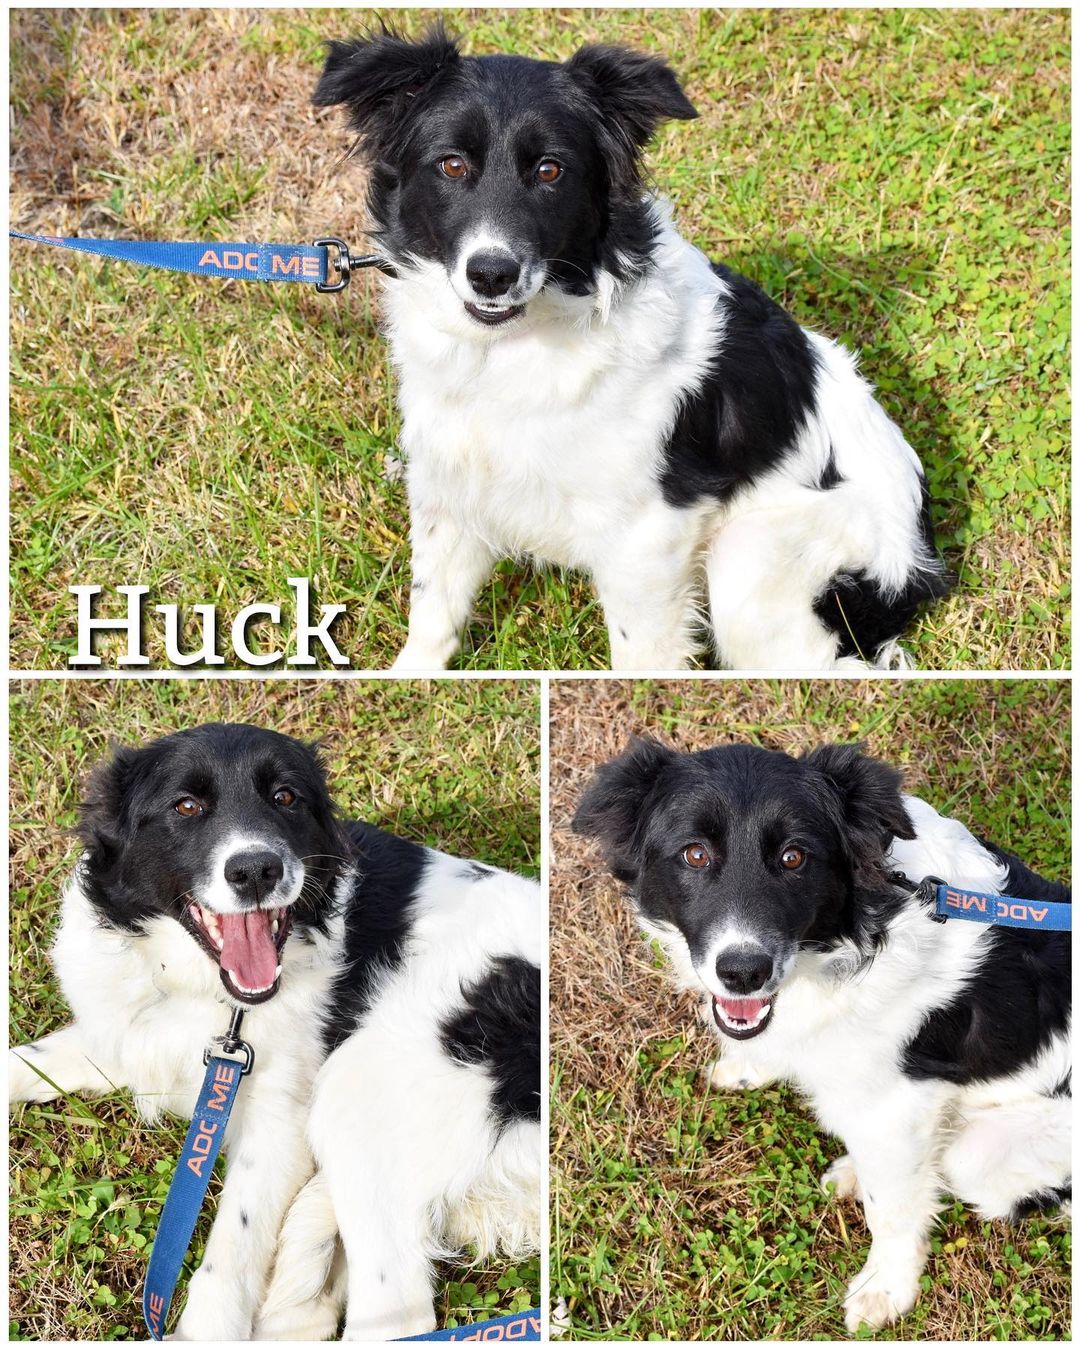 Update: Adopted
Meet Huck!
Huck is a sweet, loving, and timid 4 month old Border Collie mix puppy looking for his forever home! He loves to be pet, play, and loved on by everyone he meets. Huck is ready to go home and hopes to meet his forever family soon!

Huck is neutered, up to date on vaccinations, dewormed, and current on flea/tick preventatives. 

Huck’s adoption fee is $85, plus $15 for microchip